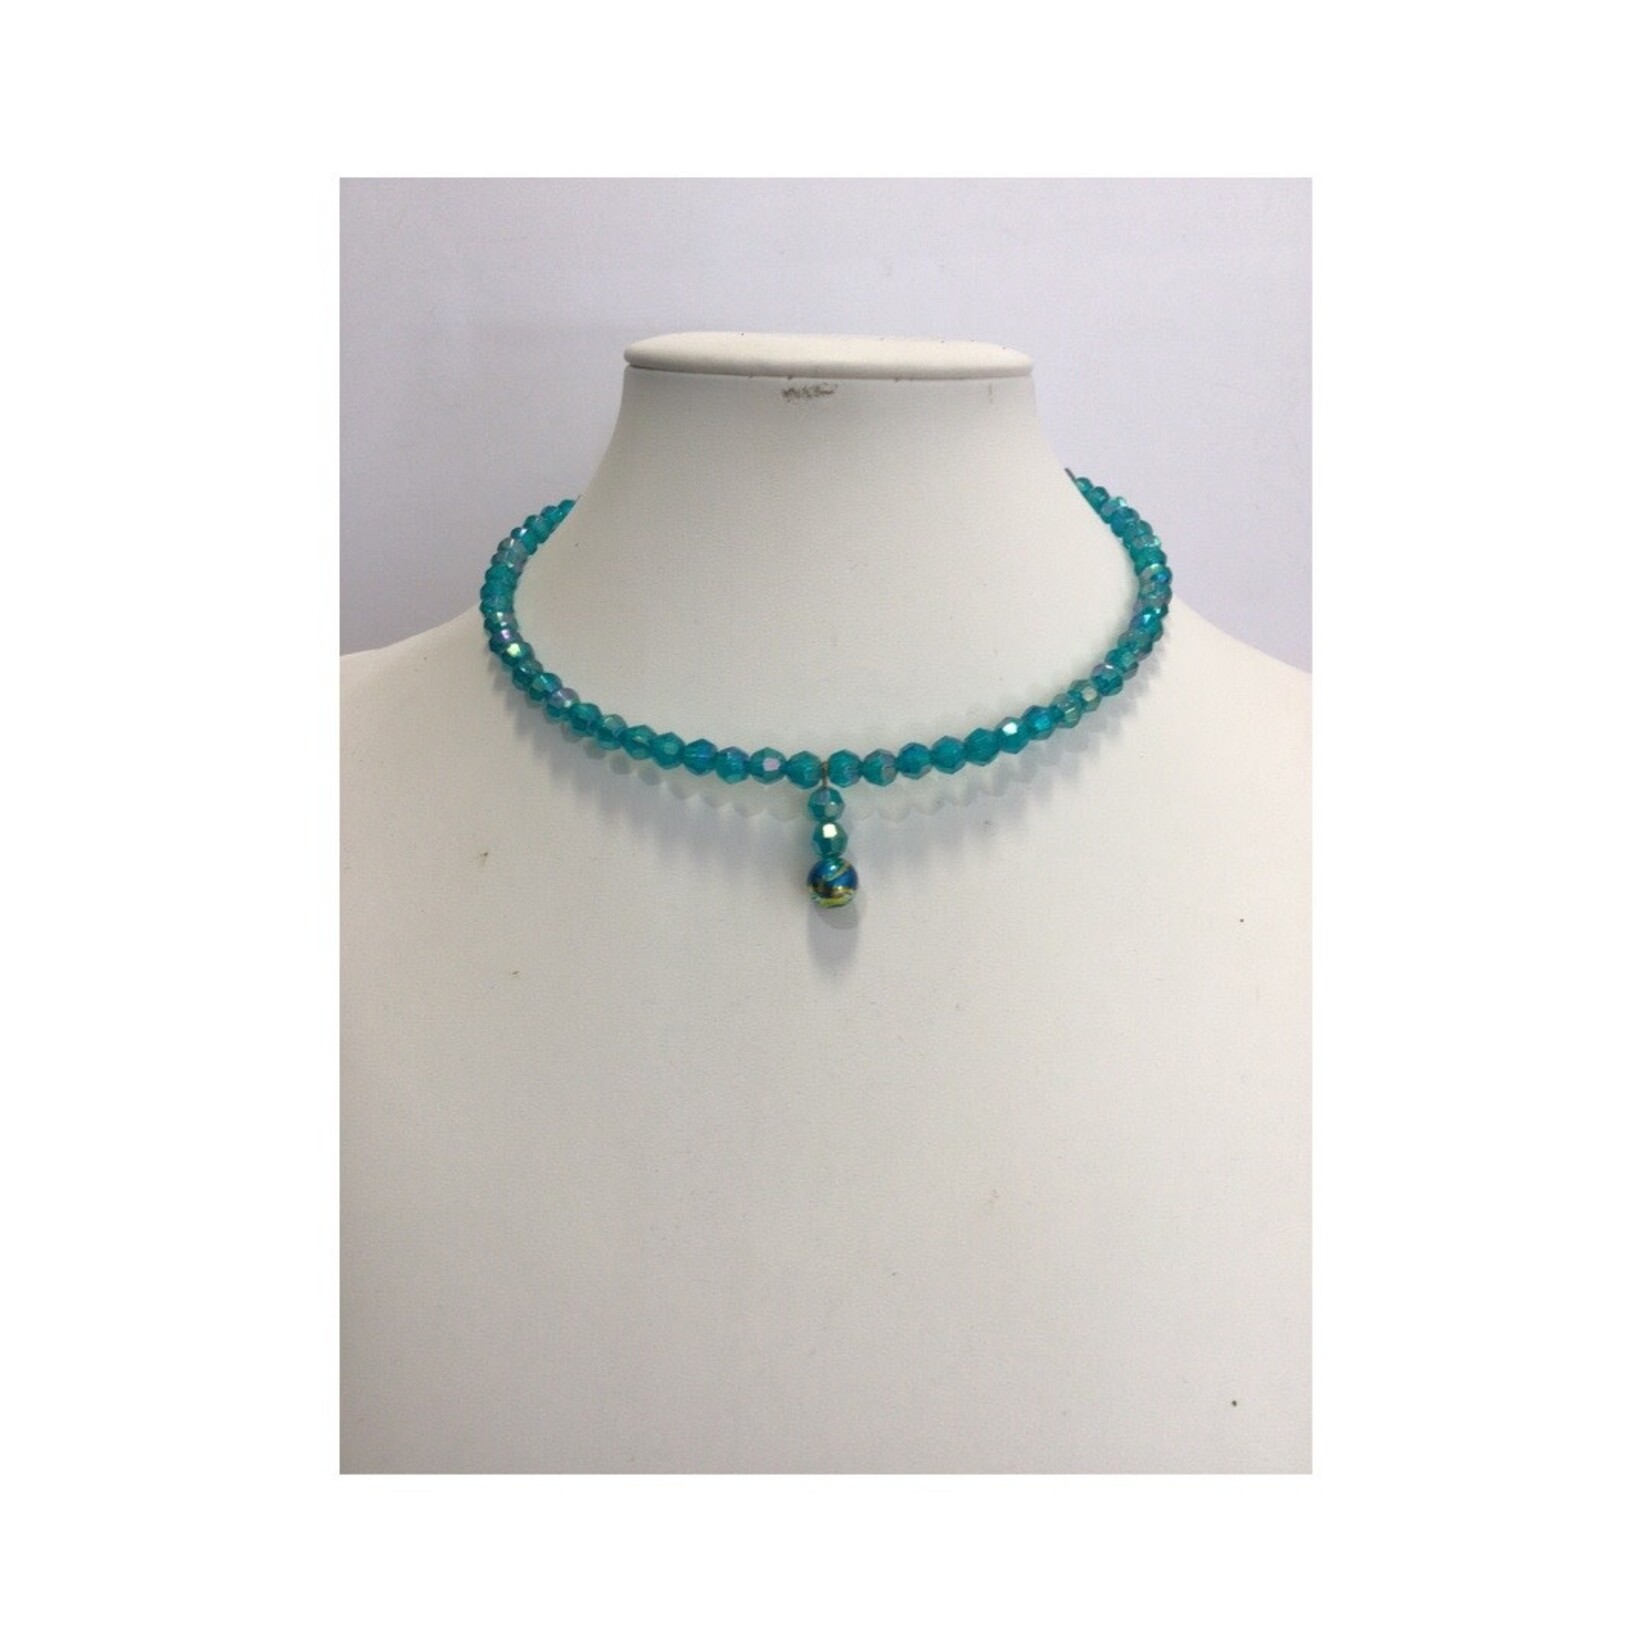 OPO Turquoise Glass Bead Choker Necklace